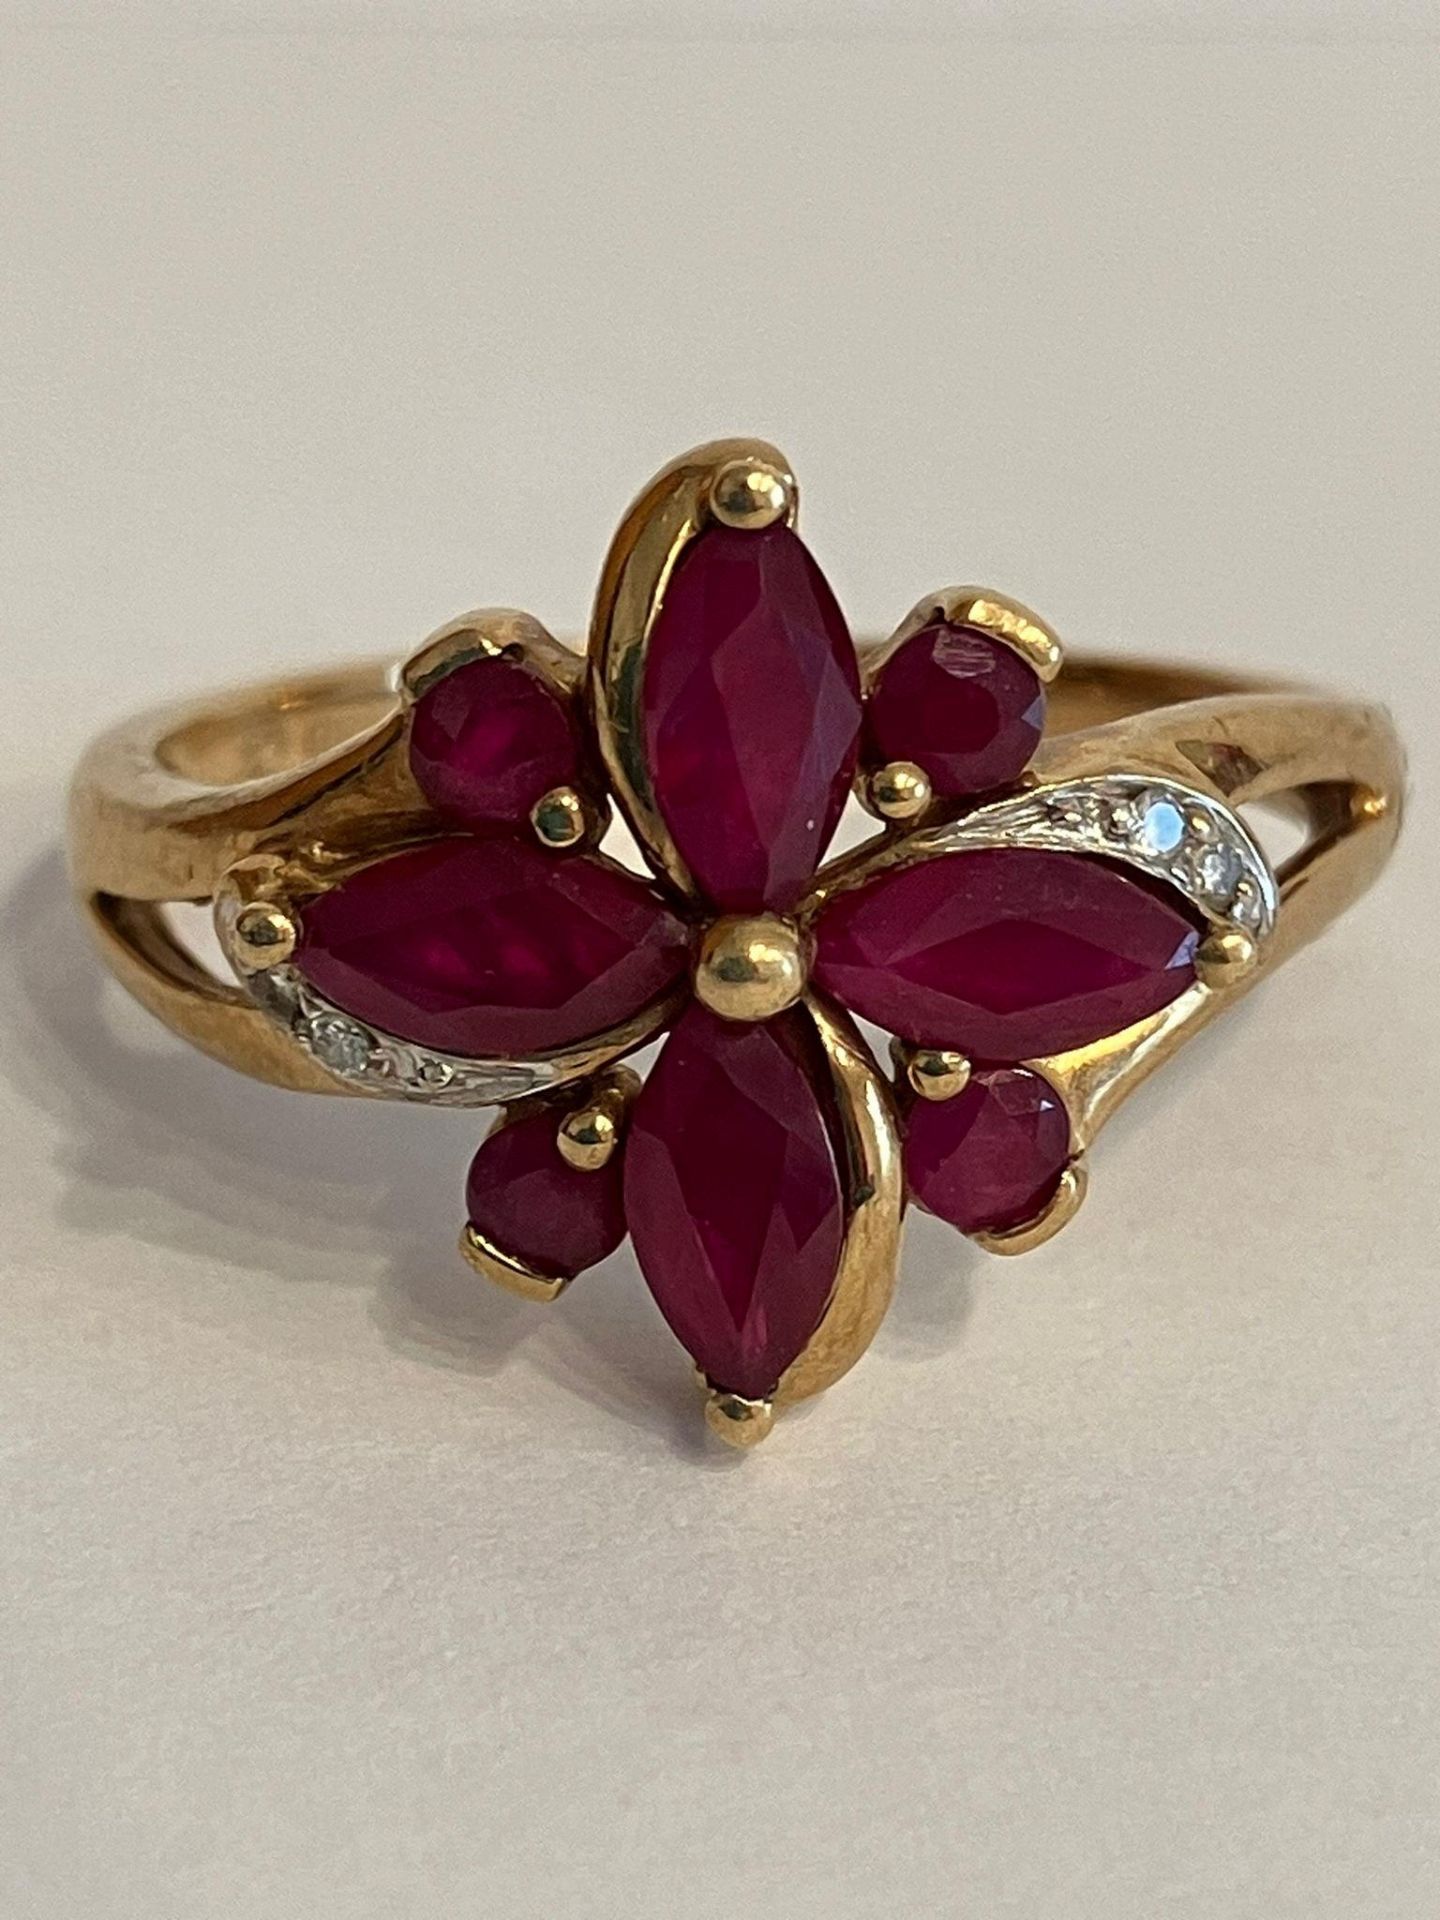 Beautiful 9 carat GOLD, DIAMOND and RUBY DRESS RING. Consisting Marquise and Round cut RUBIES with